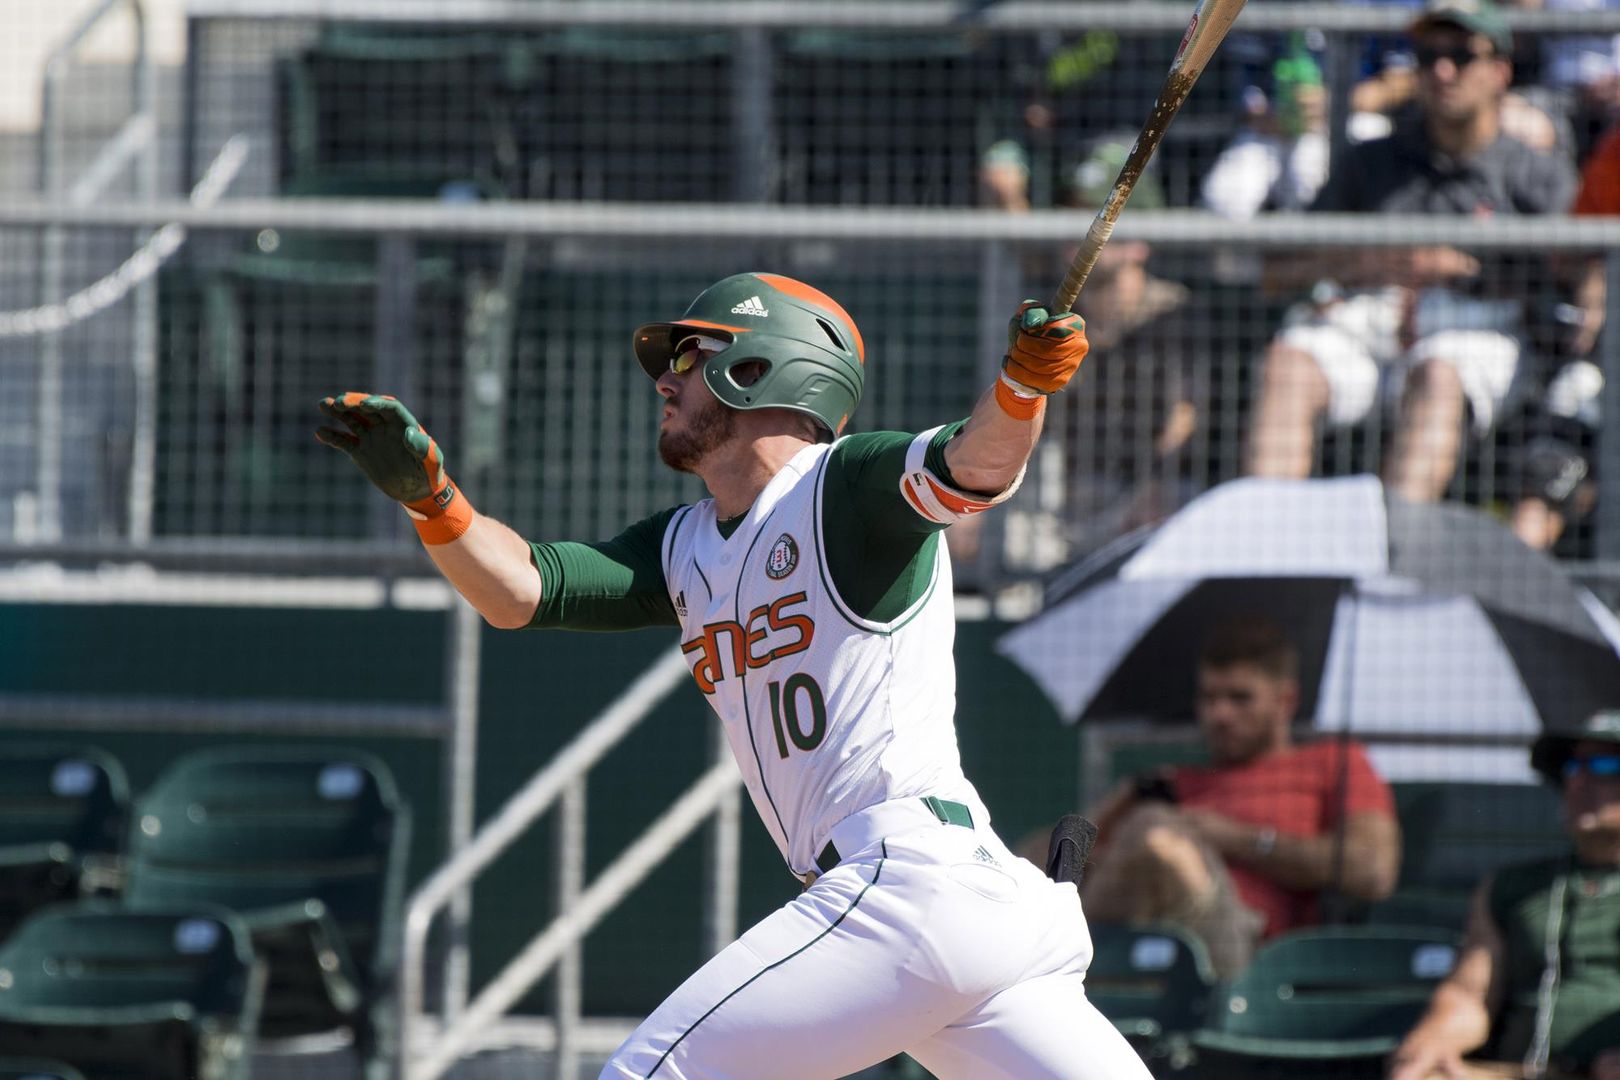 Canes Complete Sweep With Walk-Off